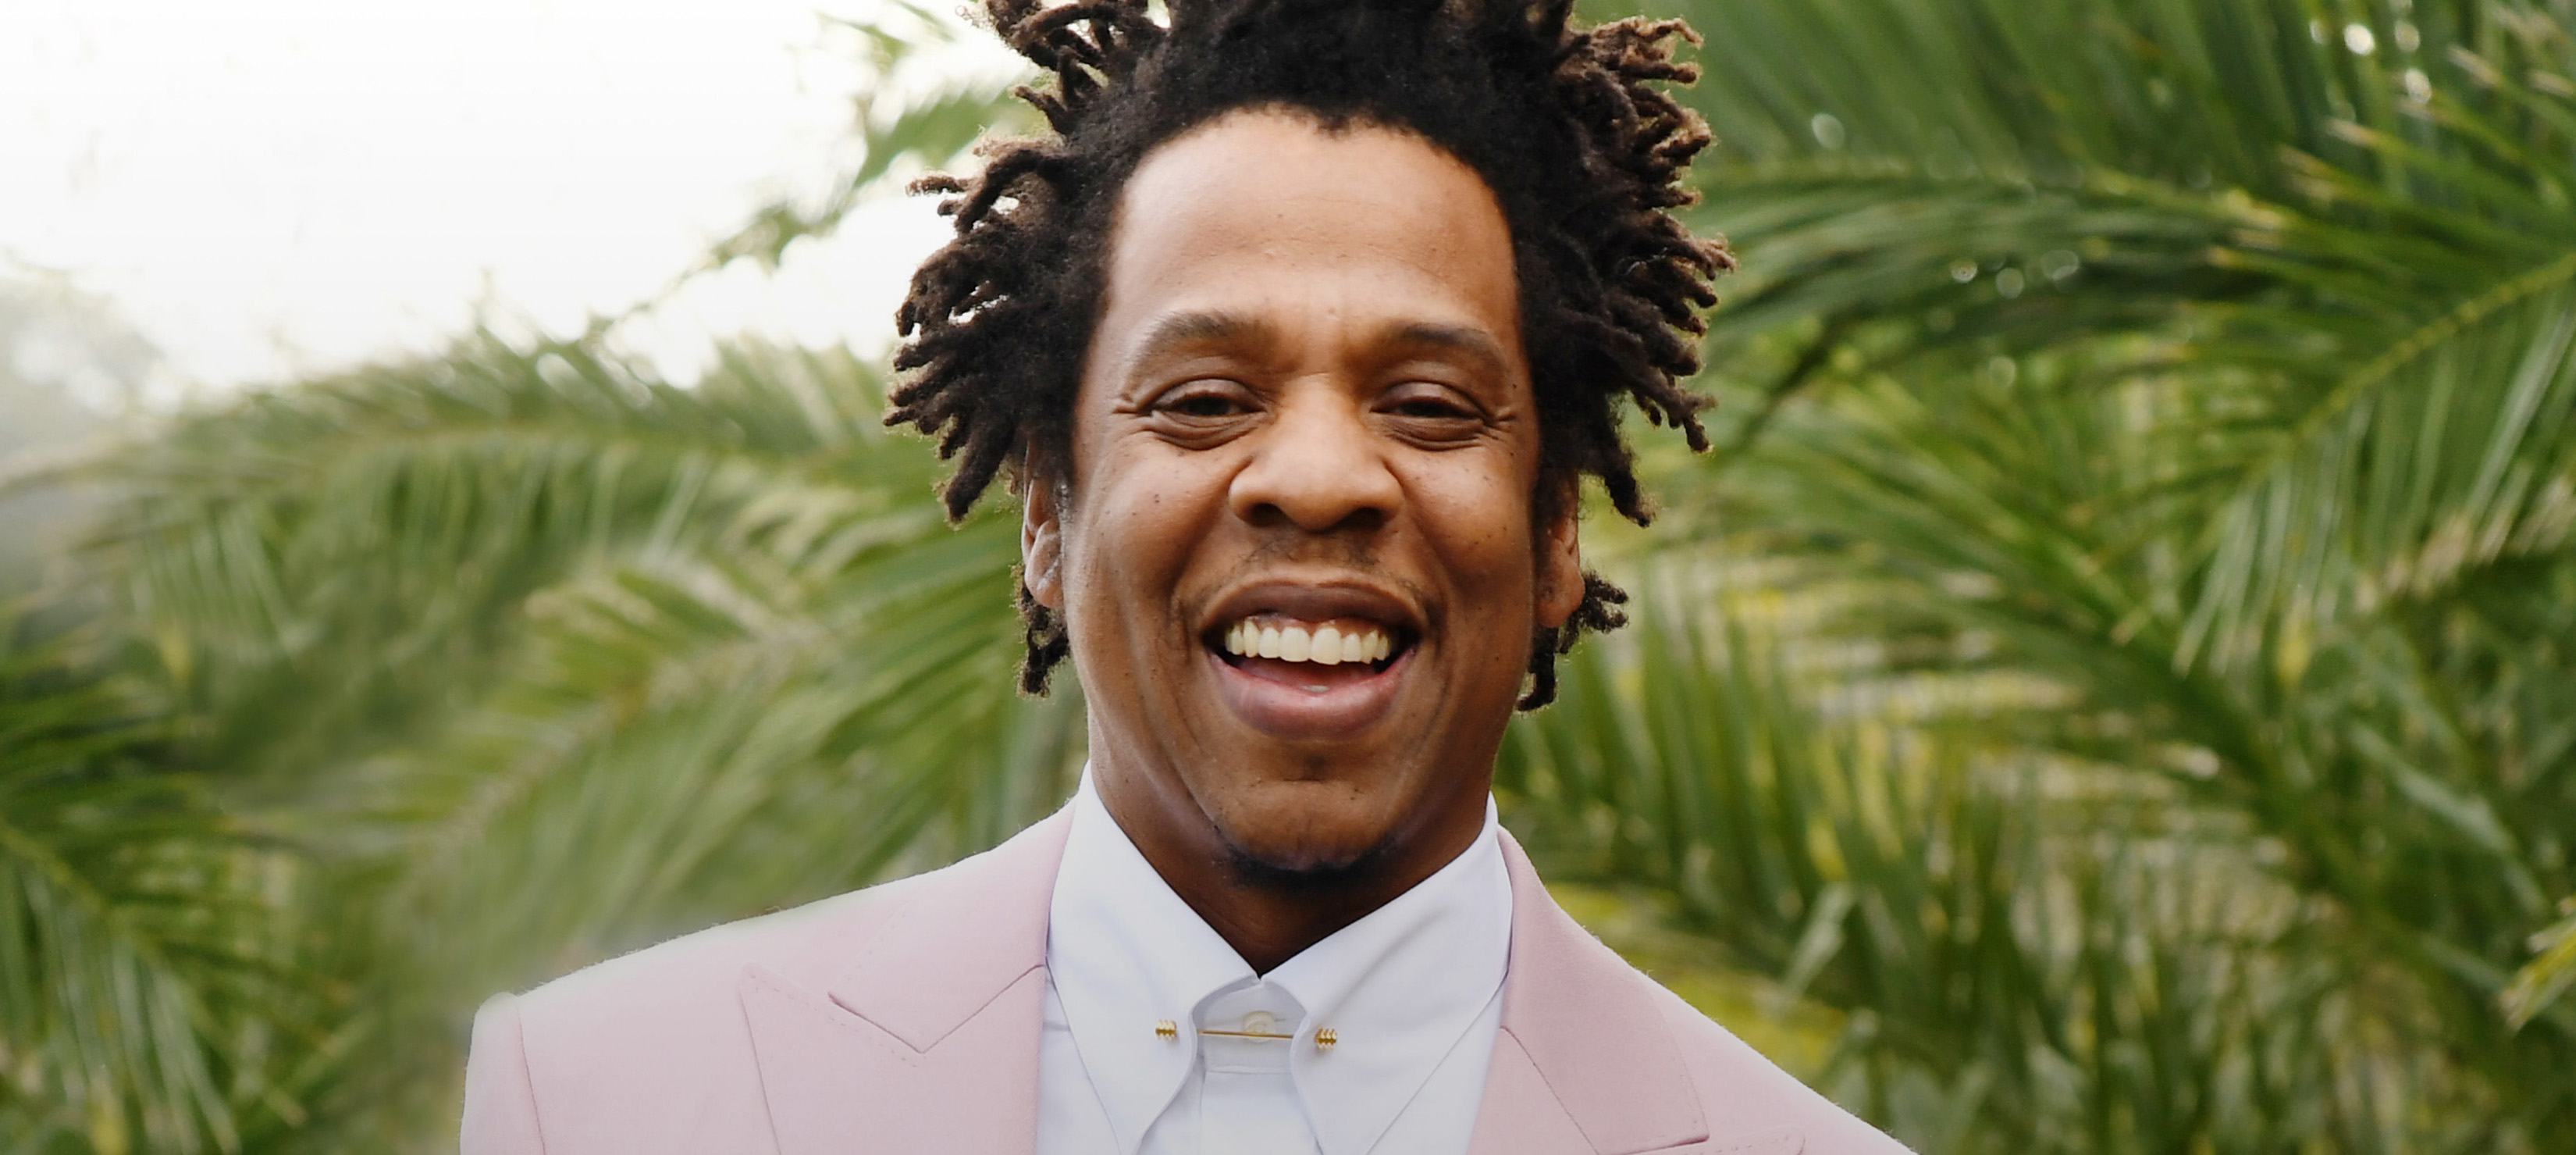 Is Jay-Z too Old for Hip Hop?